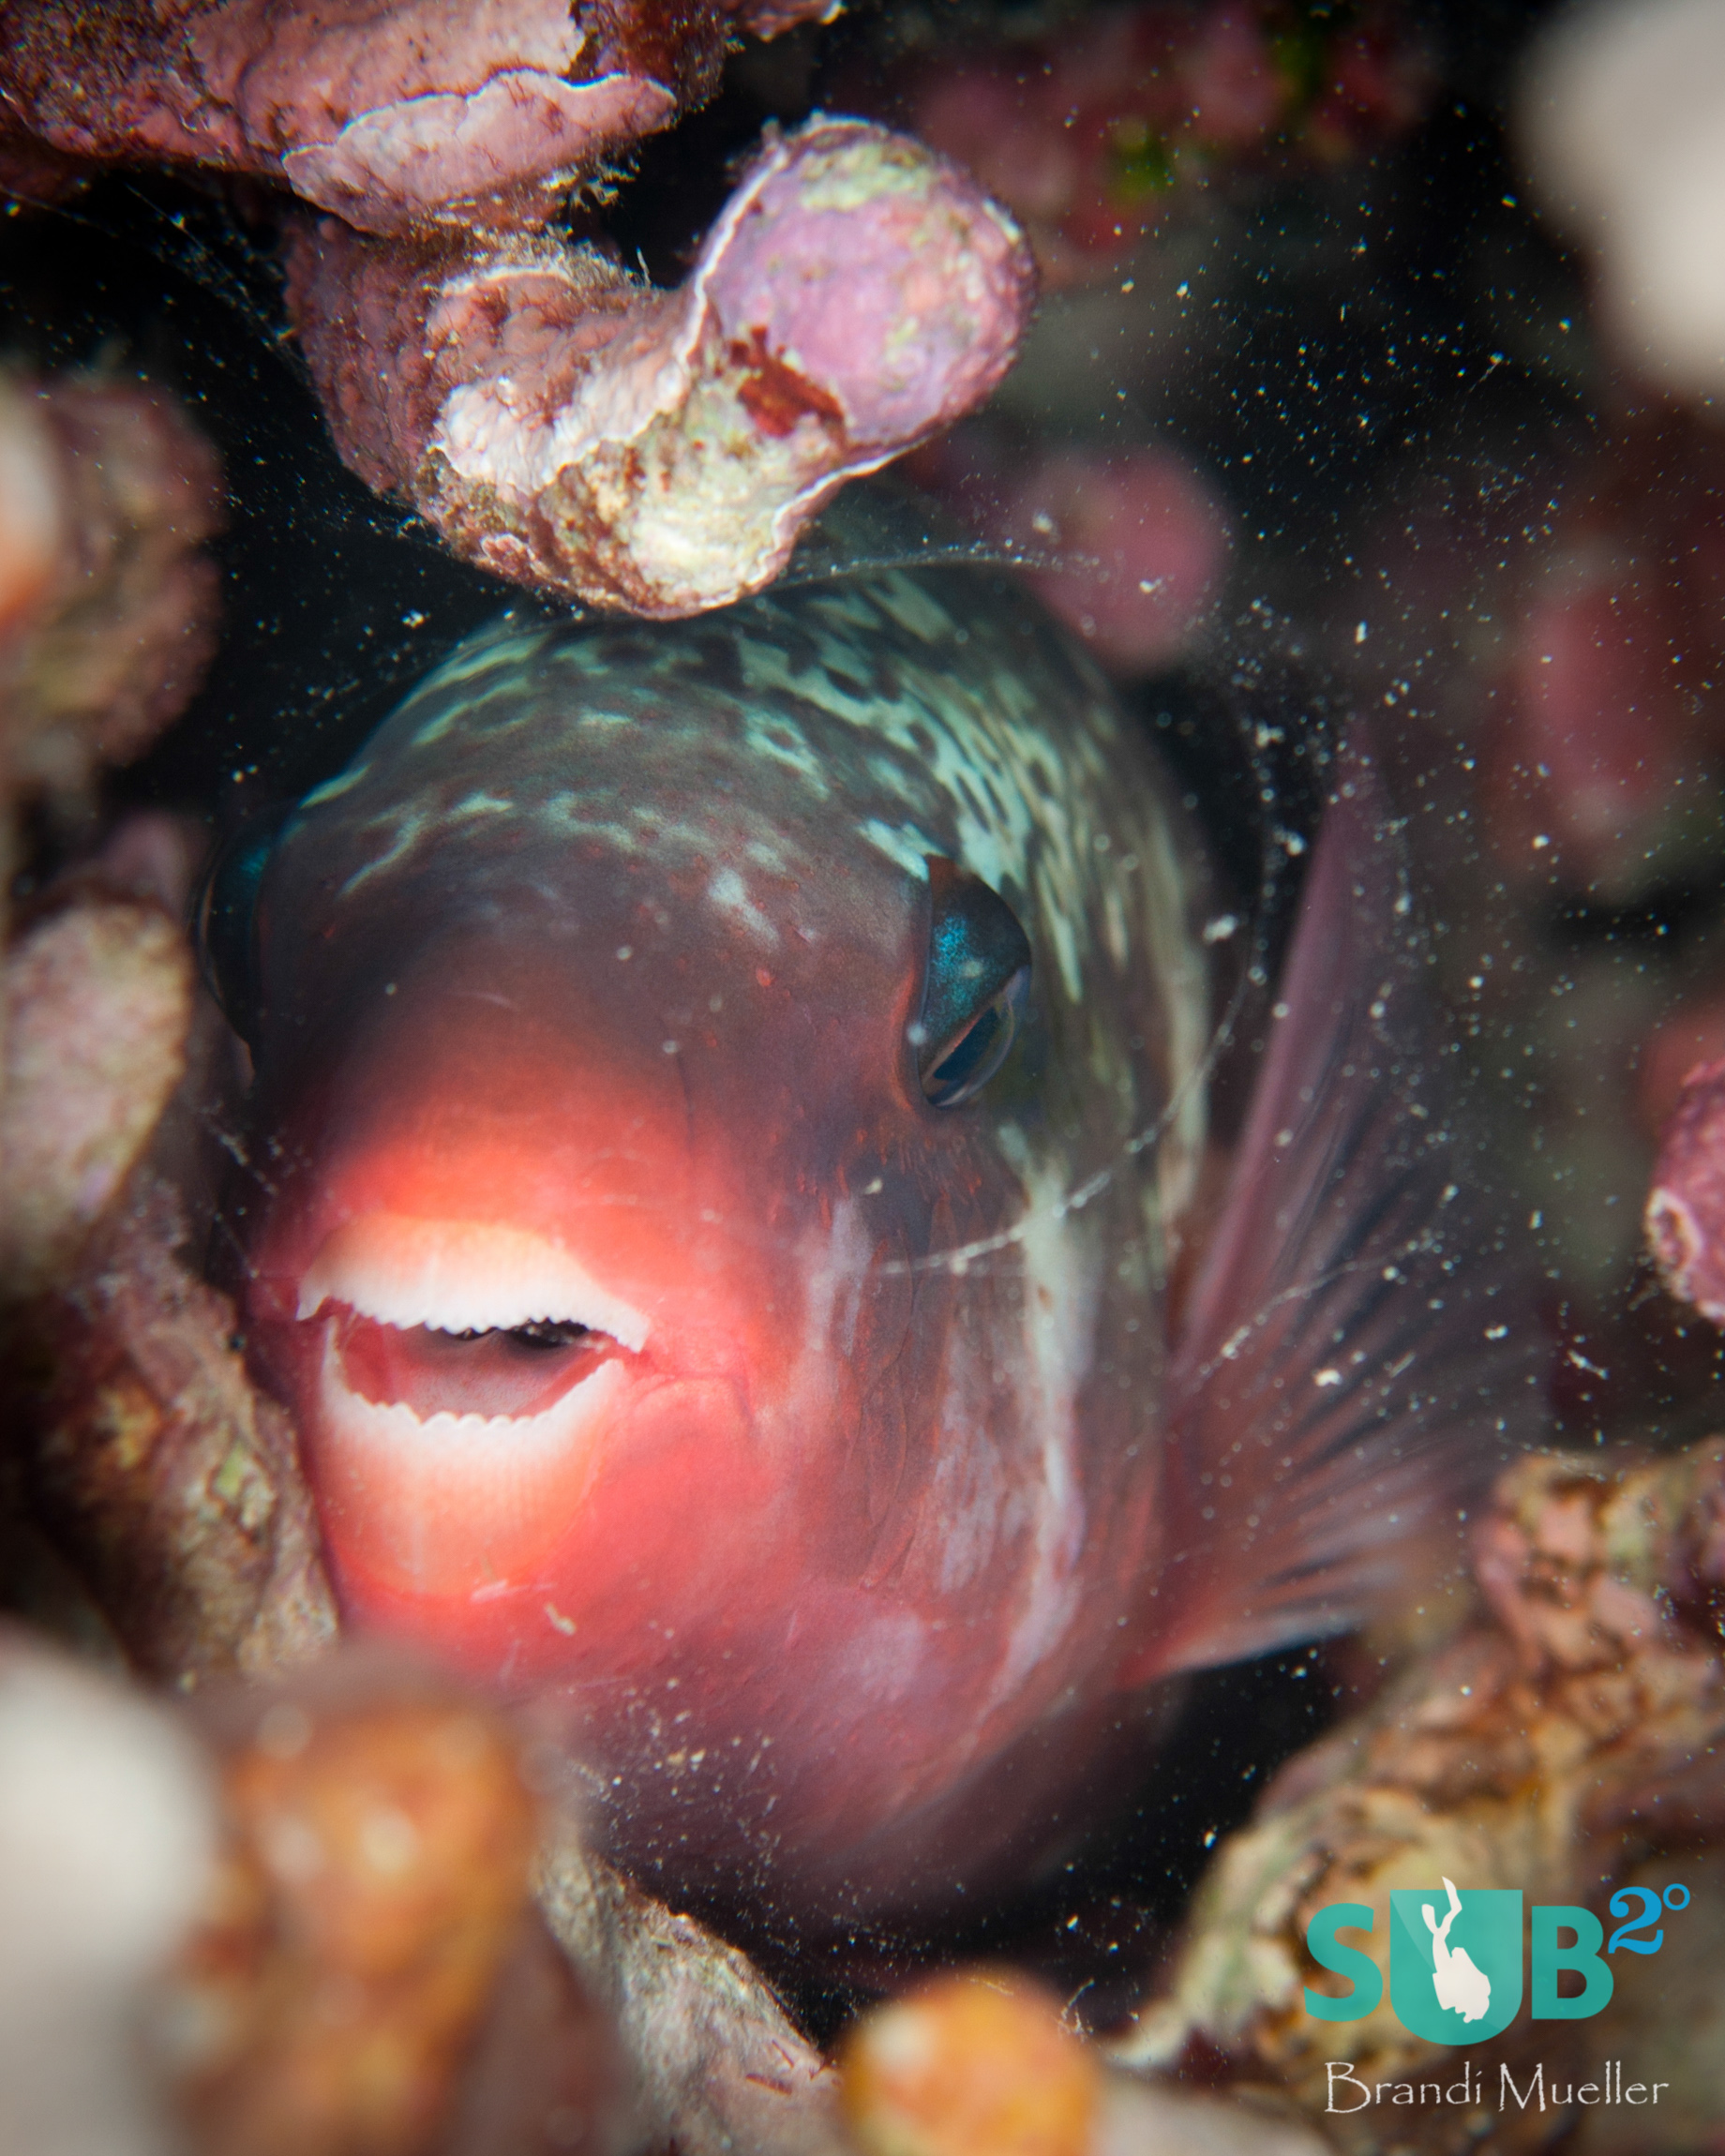 Parrotfish protect themselves at night by making a cocoon or bubble of mucus around them.  If a predator tries to attack them, the bubble pops and wakes them up so they can escape.